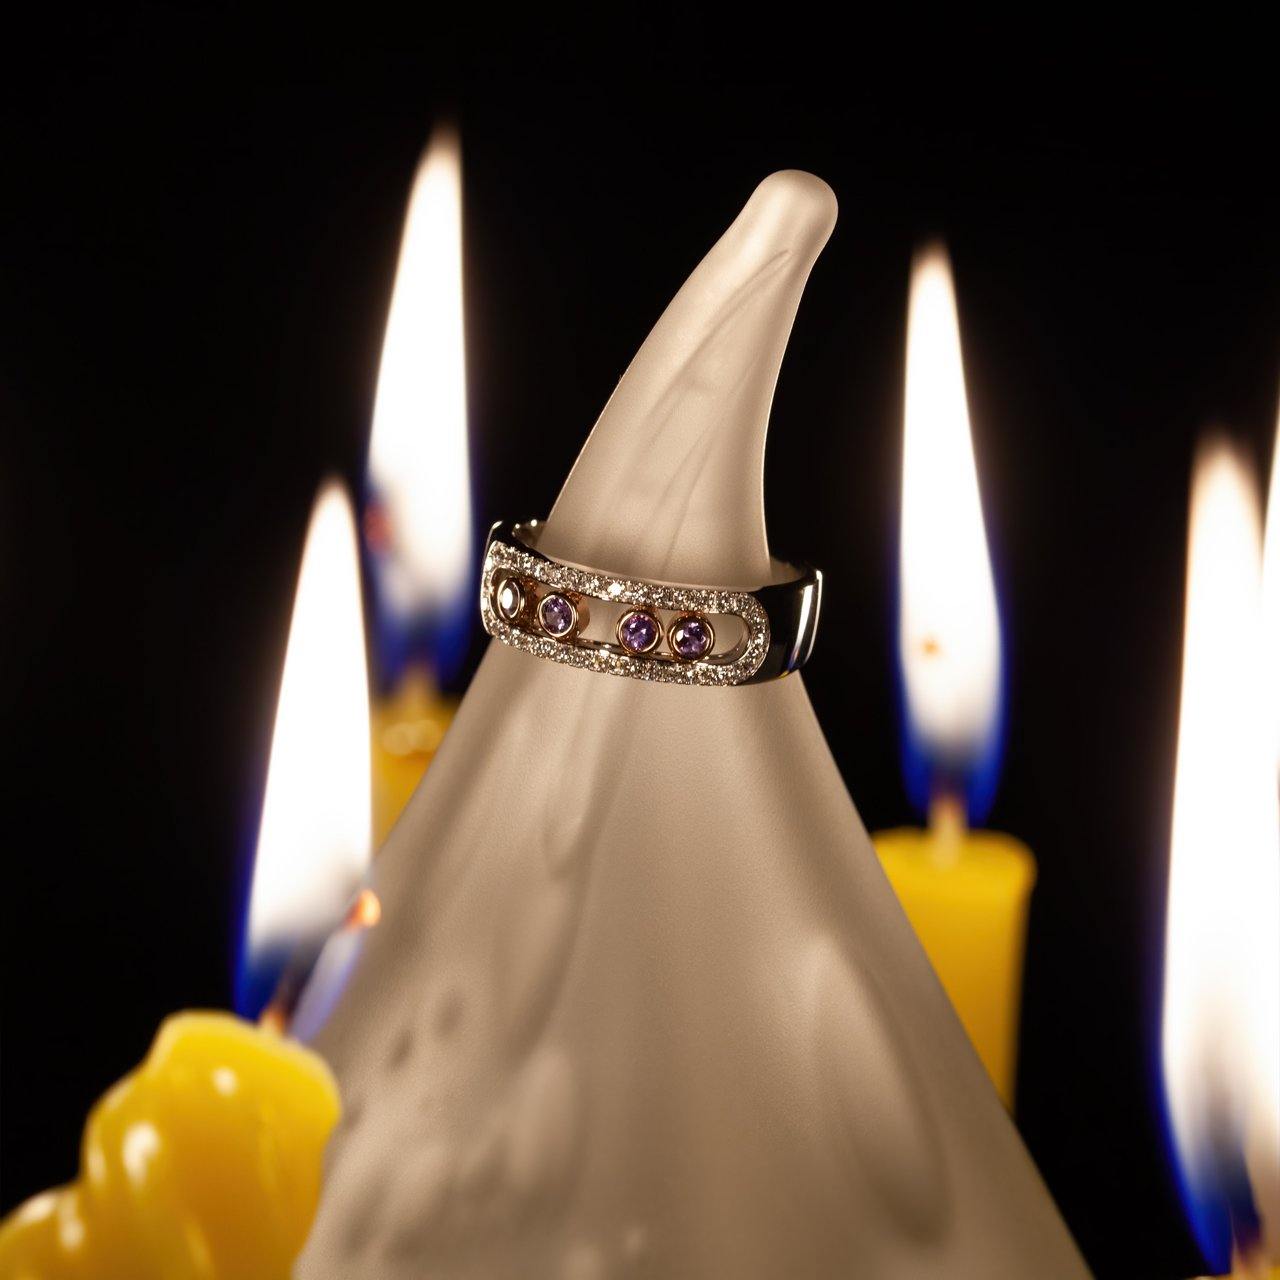 0.22ct natural alexandrite engagement ring in 18k white and rose gold on a candle